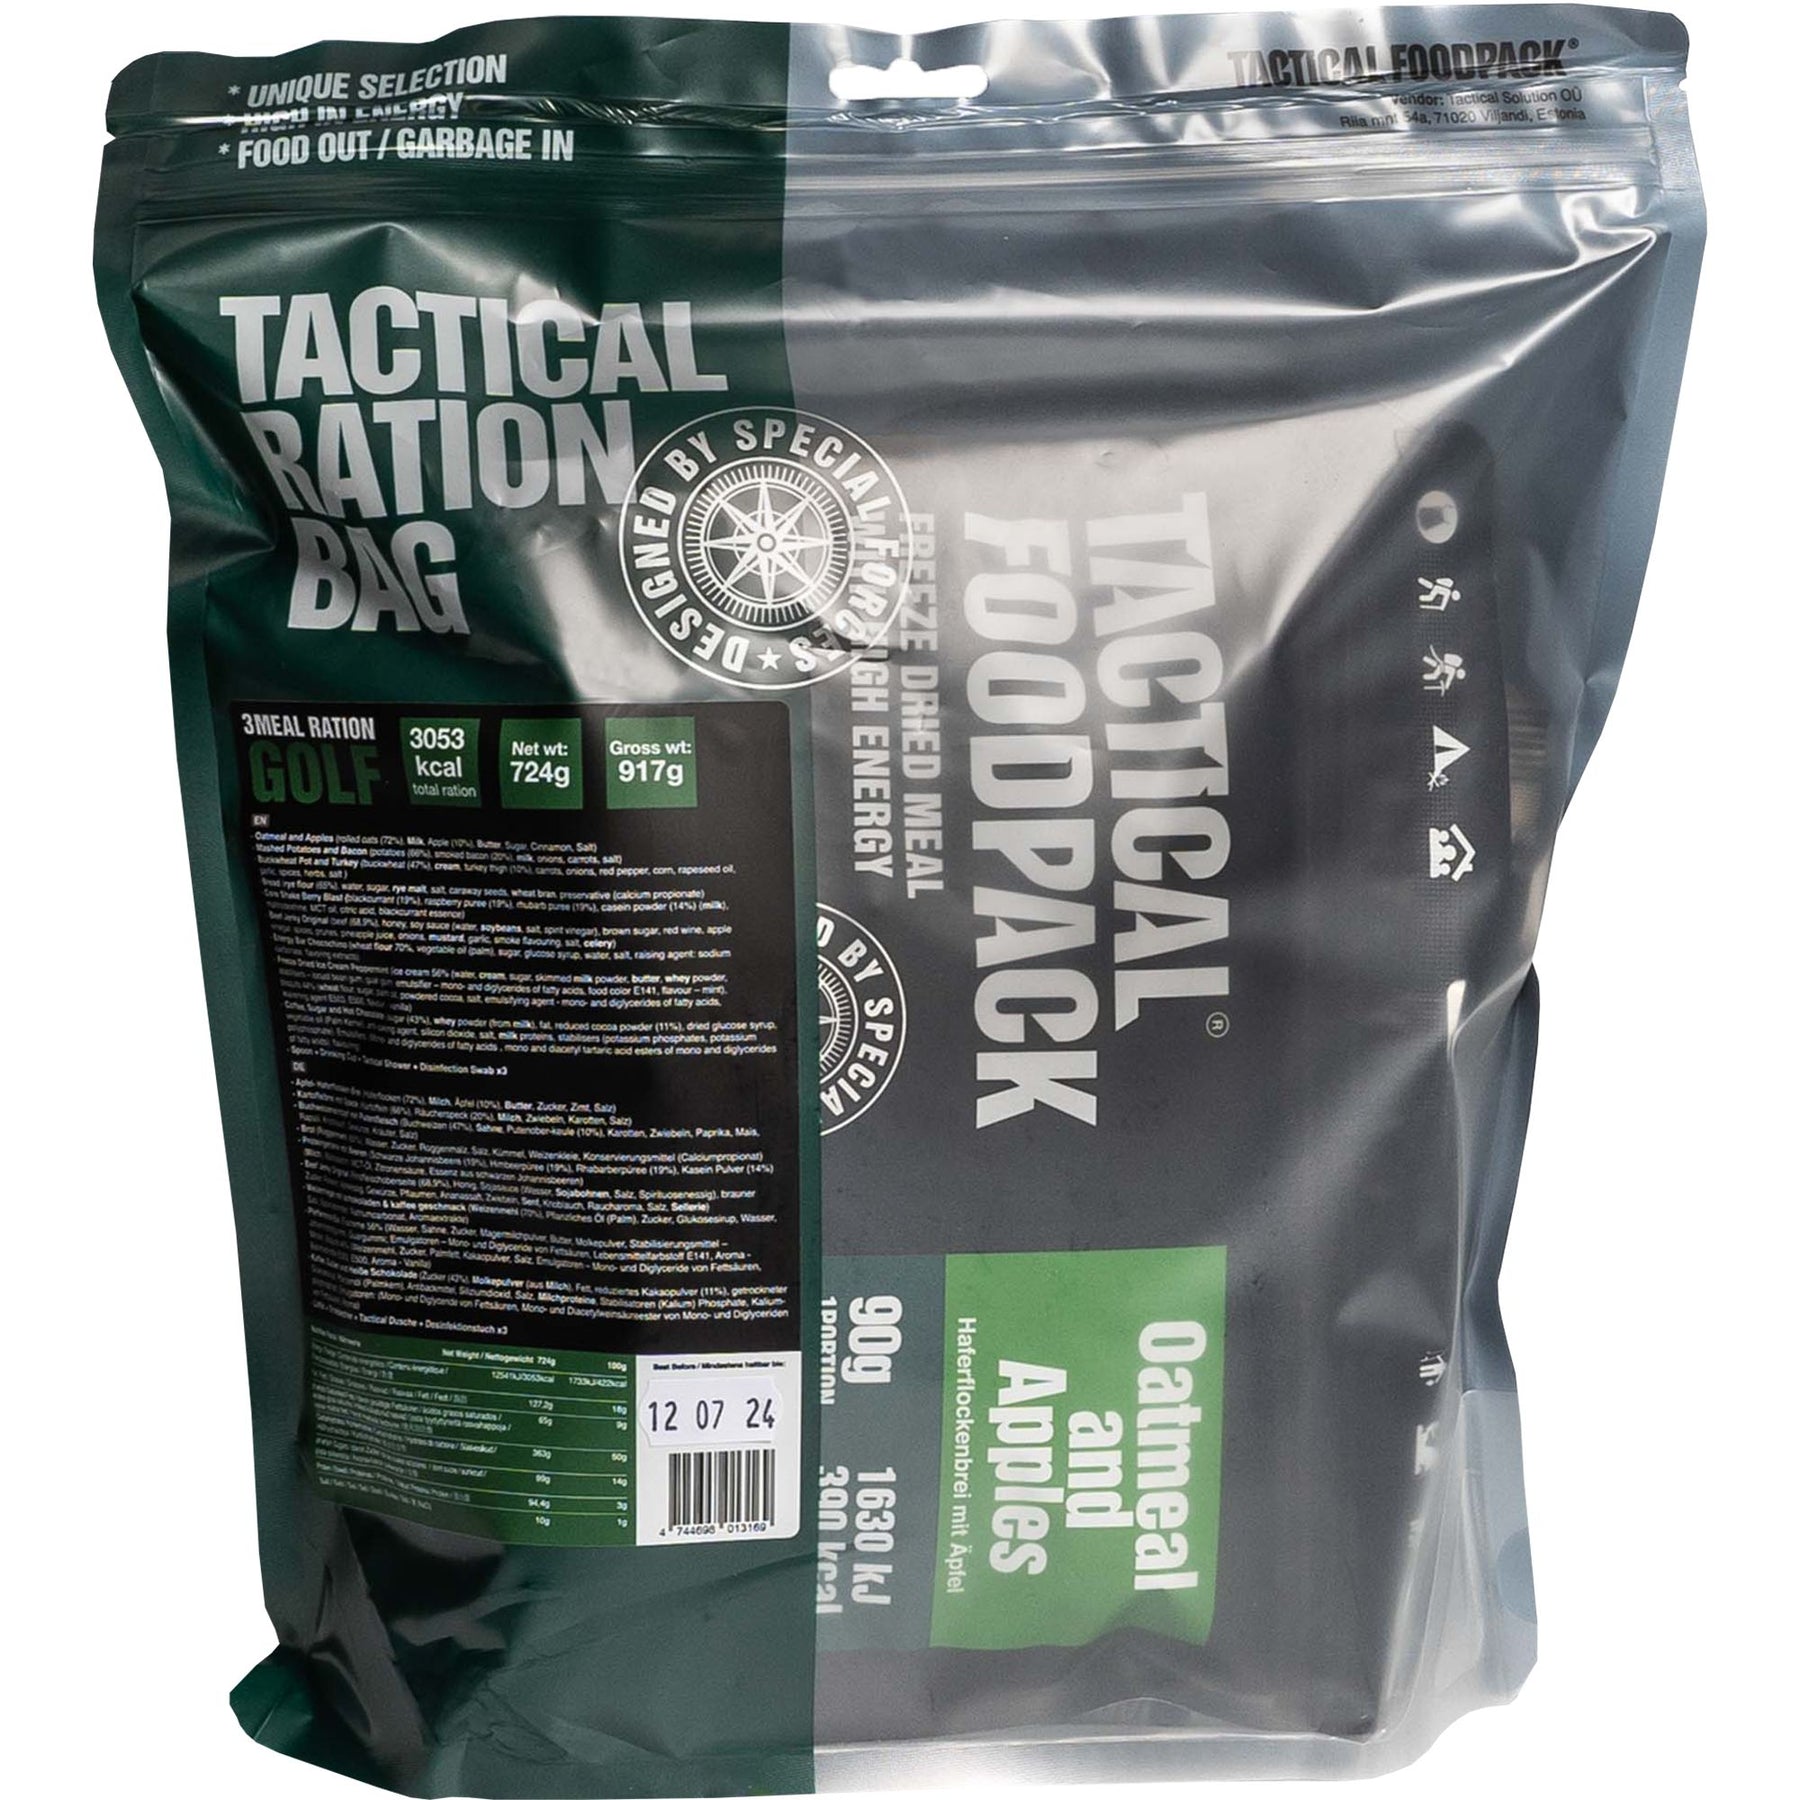 Tactical Foodpack | 3 Meal Ration GOLF 740g